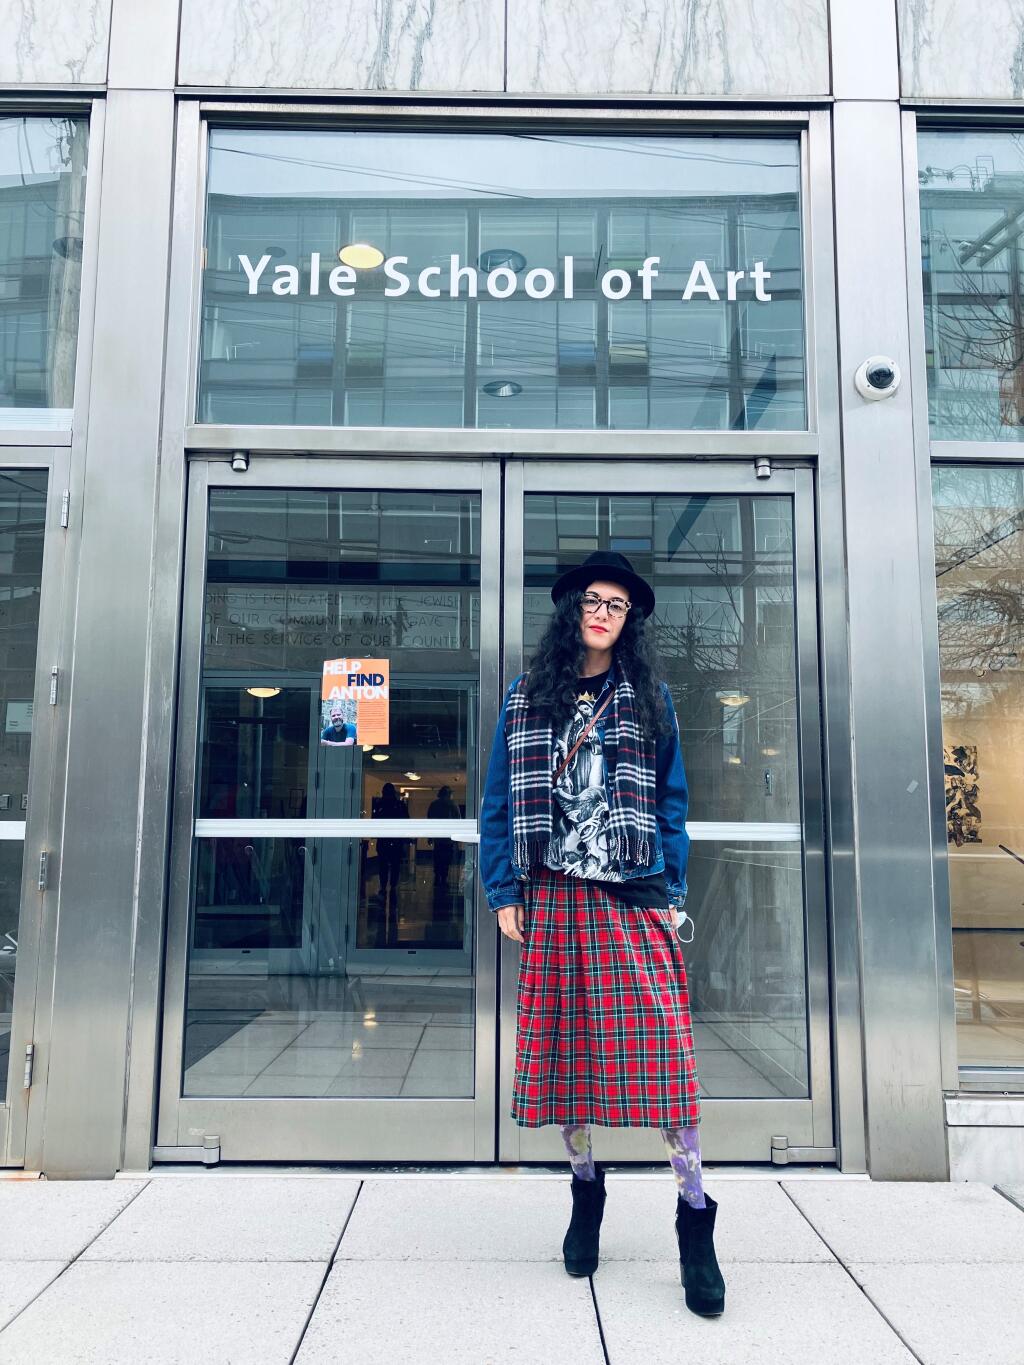 Muralist Maria De Los Angeles, formerly of Santa Rosa, will join the faculty of the Yale School of Art at the end of August. (Ryan Bonilla)